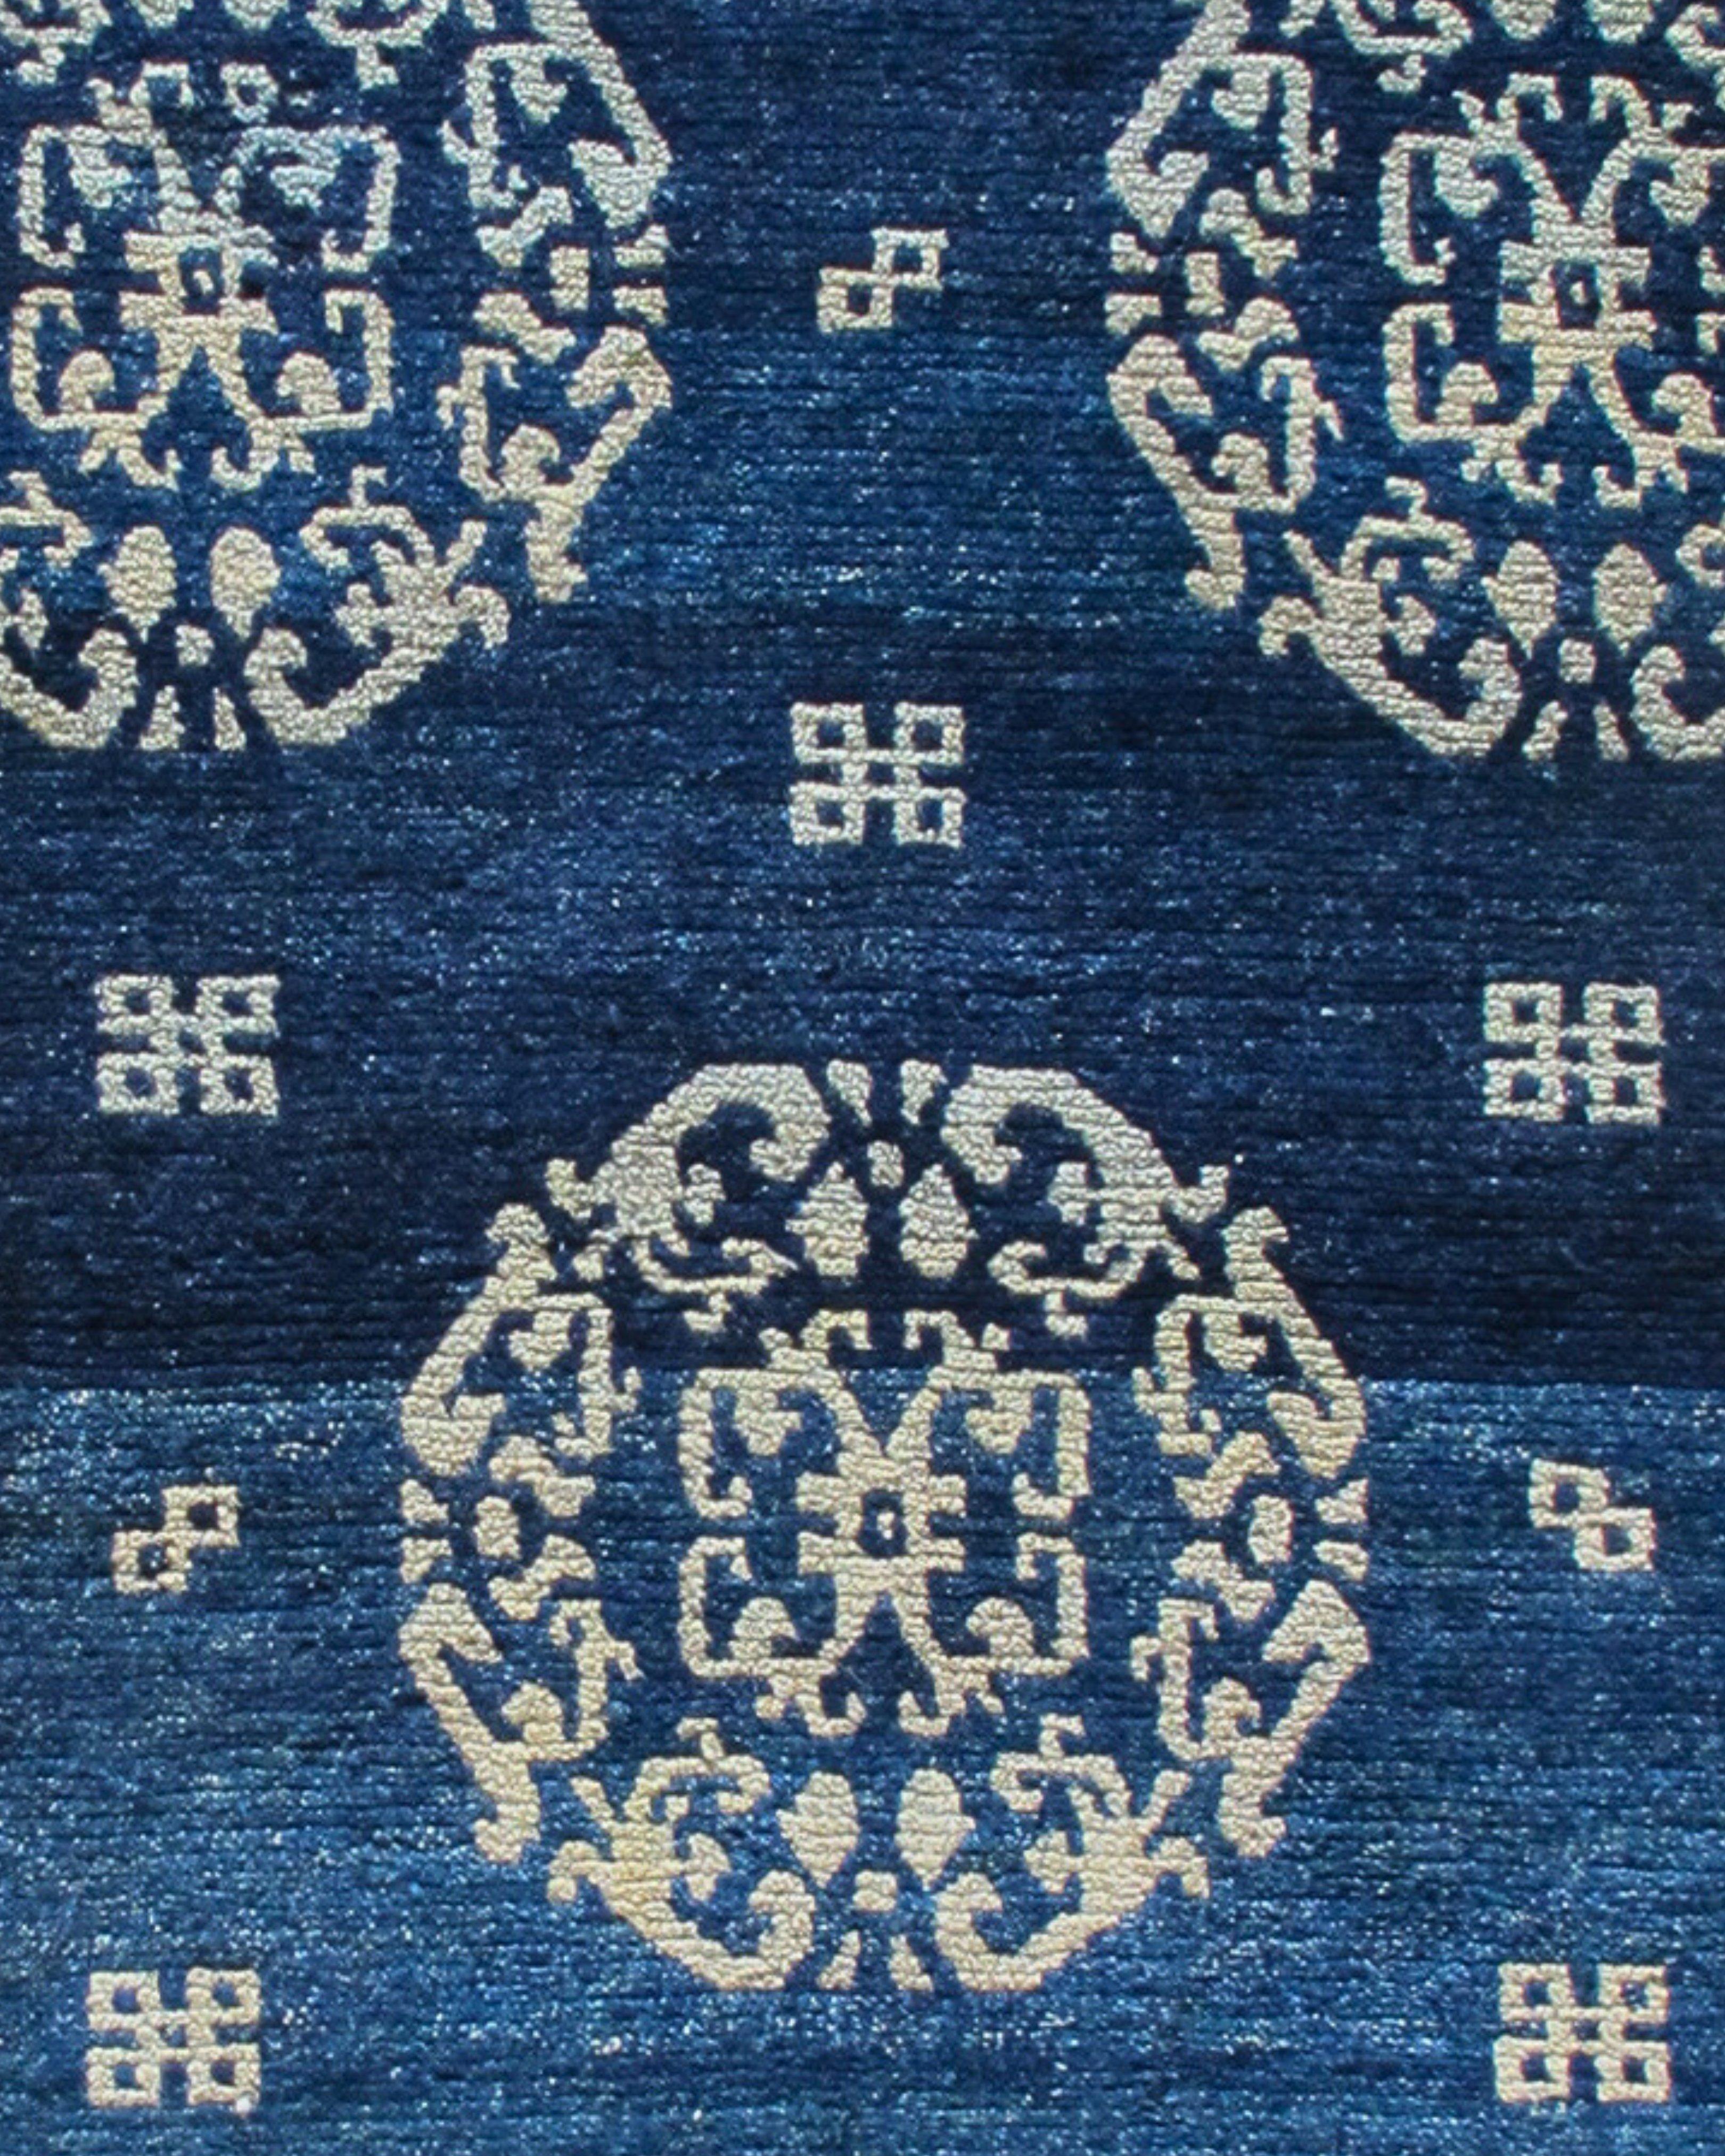 Antique Blue-Indigo Tibetan Khaden Rug with Peonies, Late 19th Century

This evocative Tibetan khaden, or sleeping rug, draws large stylized peonies inspired by Chinese textile design of the Ming and Ching dynasties against a transplendent indigo